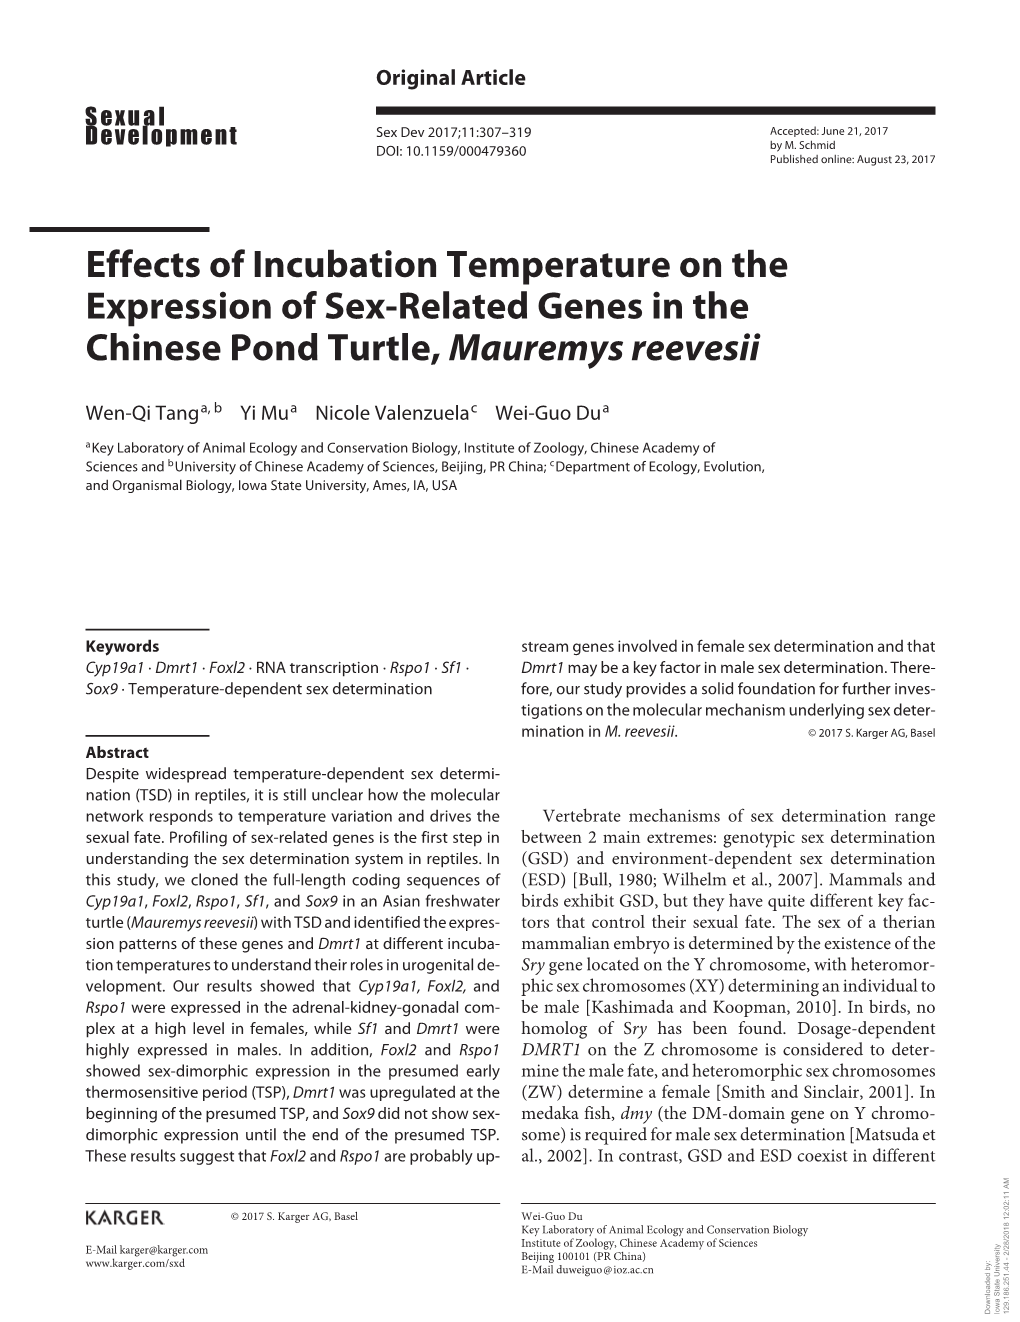 Effects of Incubation Temperature on the Expression of Sex-Related Genes in the Chinese Pond Turtle, Mauremys Reevesii